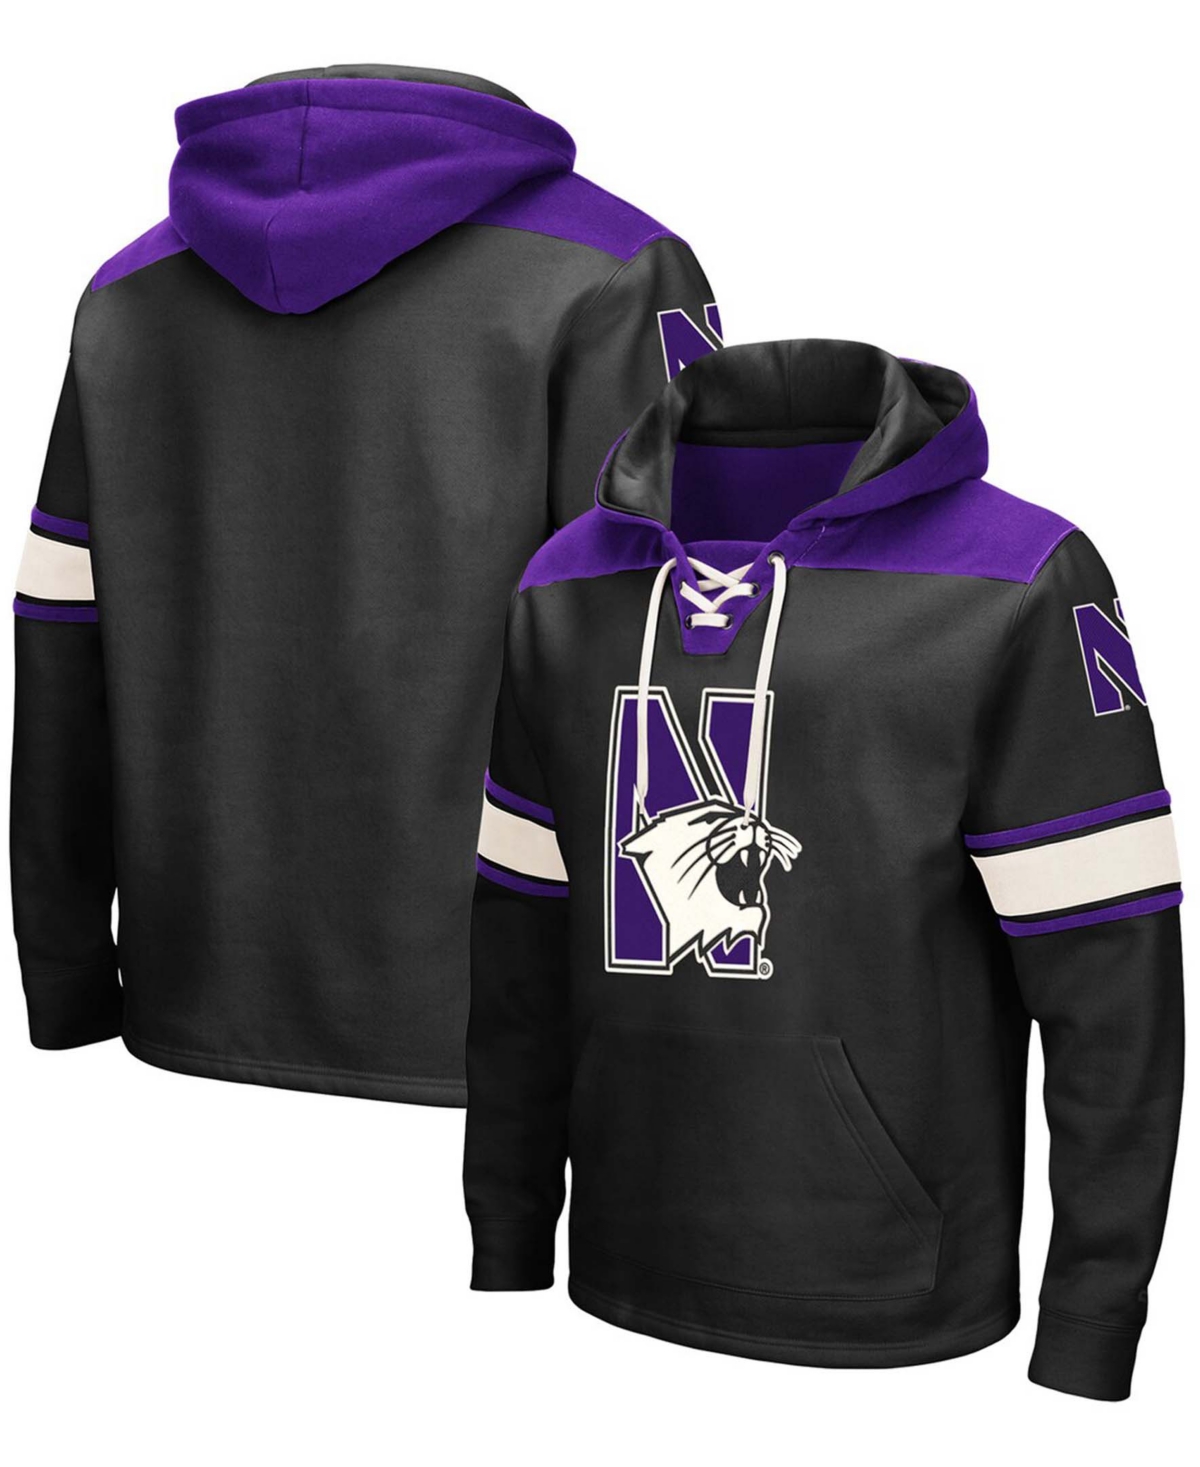 Shop Colosseum Men's Black Northwestern Wildcats 2.0 Lace-up Pullover Hoodie